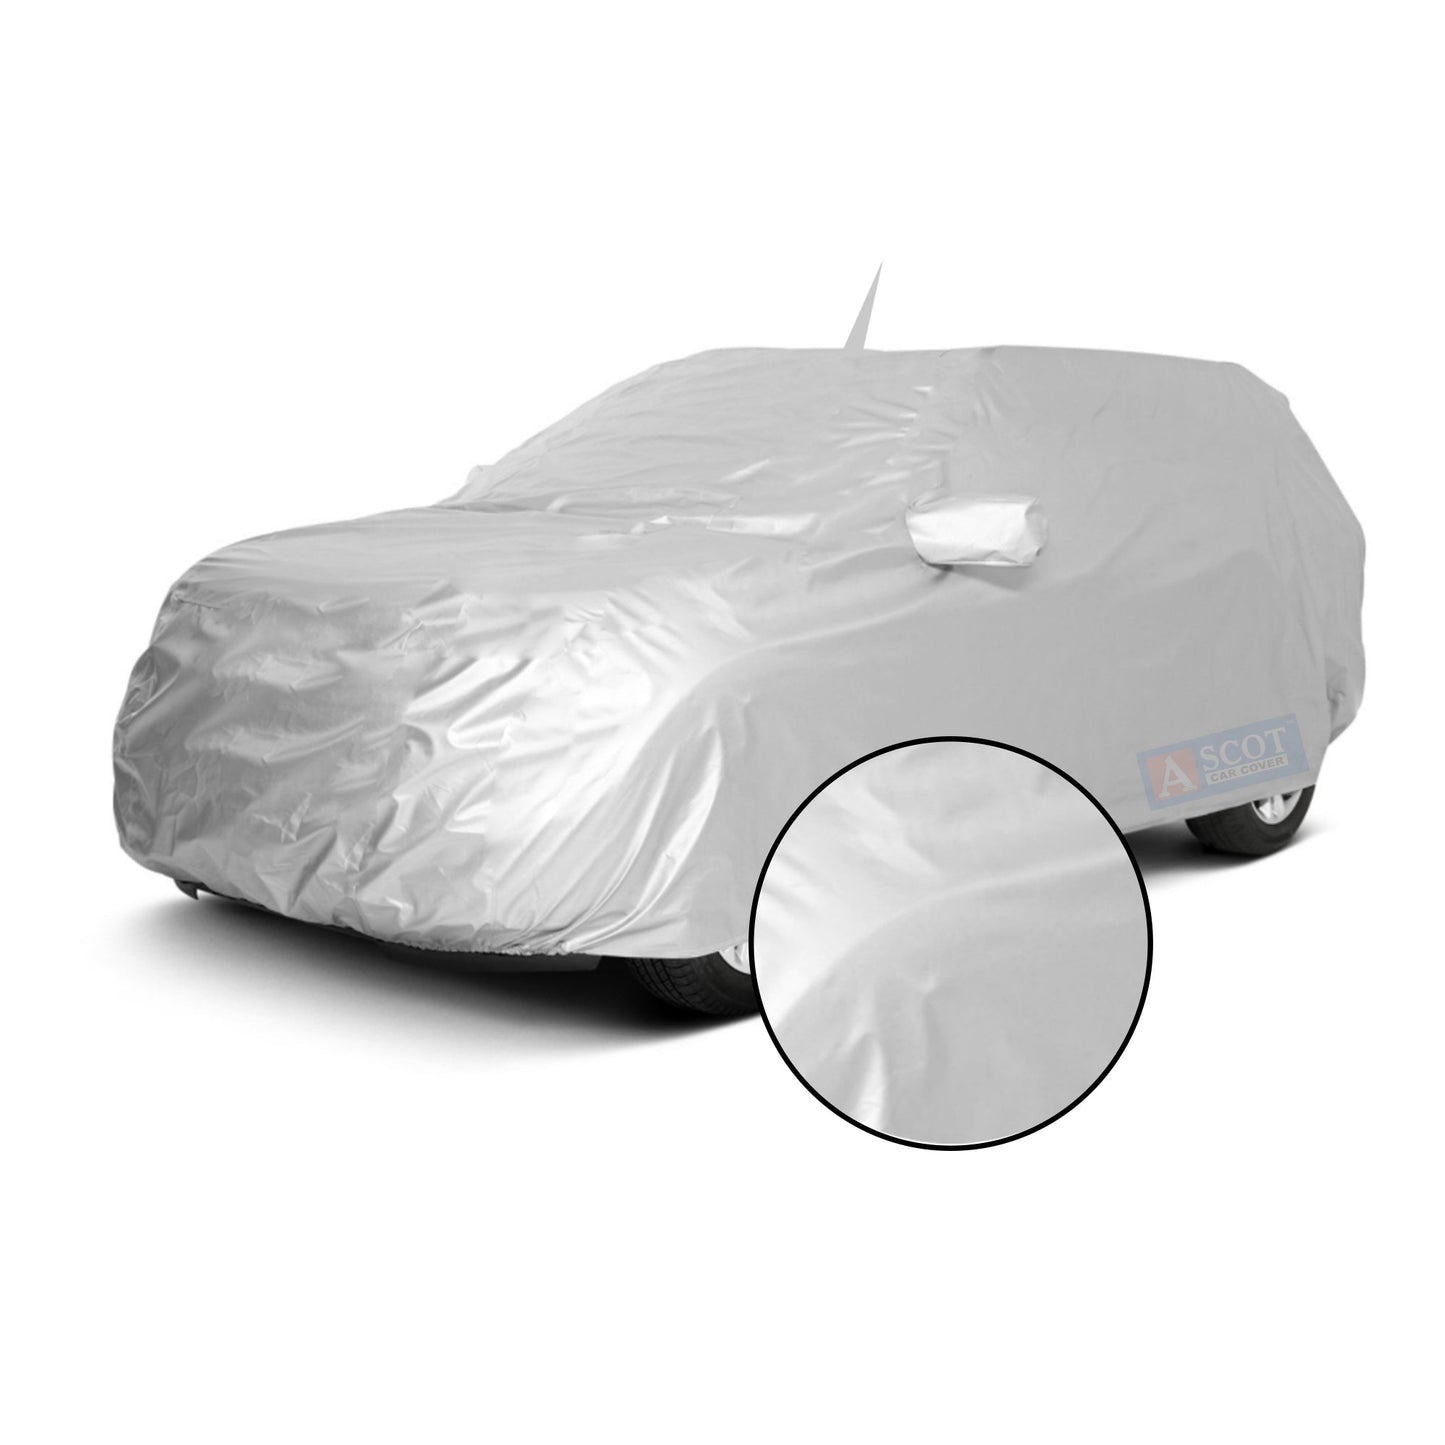 Ascot BMW X3 2010-2017 Model Car Body Cover Dust Proof, Trippel Stitched